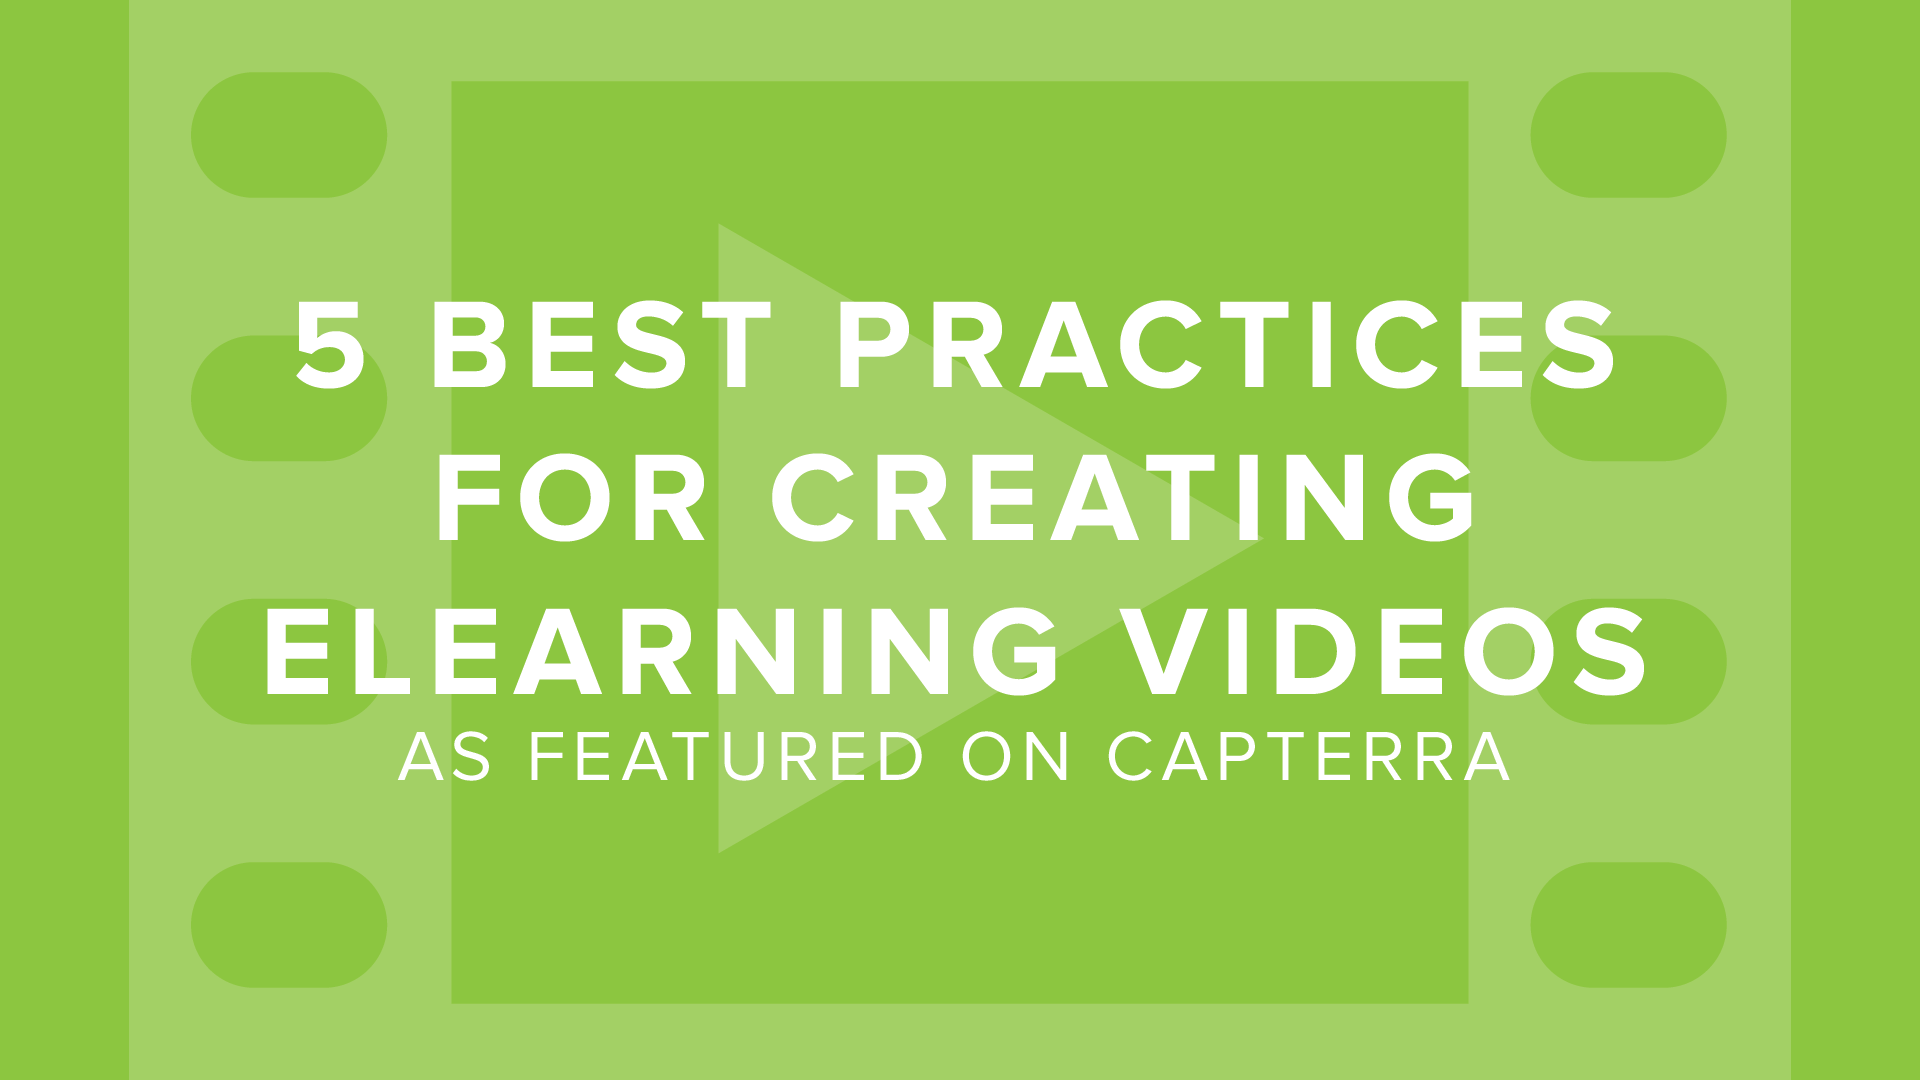 As Featured on Capterra: 5 Best Practices for Creating eLearning Videos | DigitalChalk Blog thumbnail